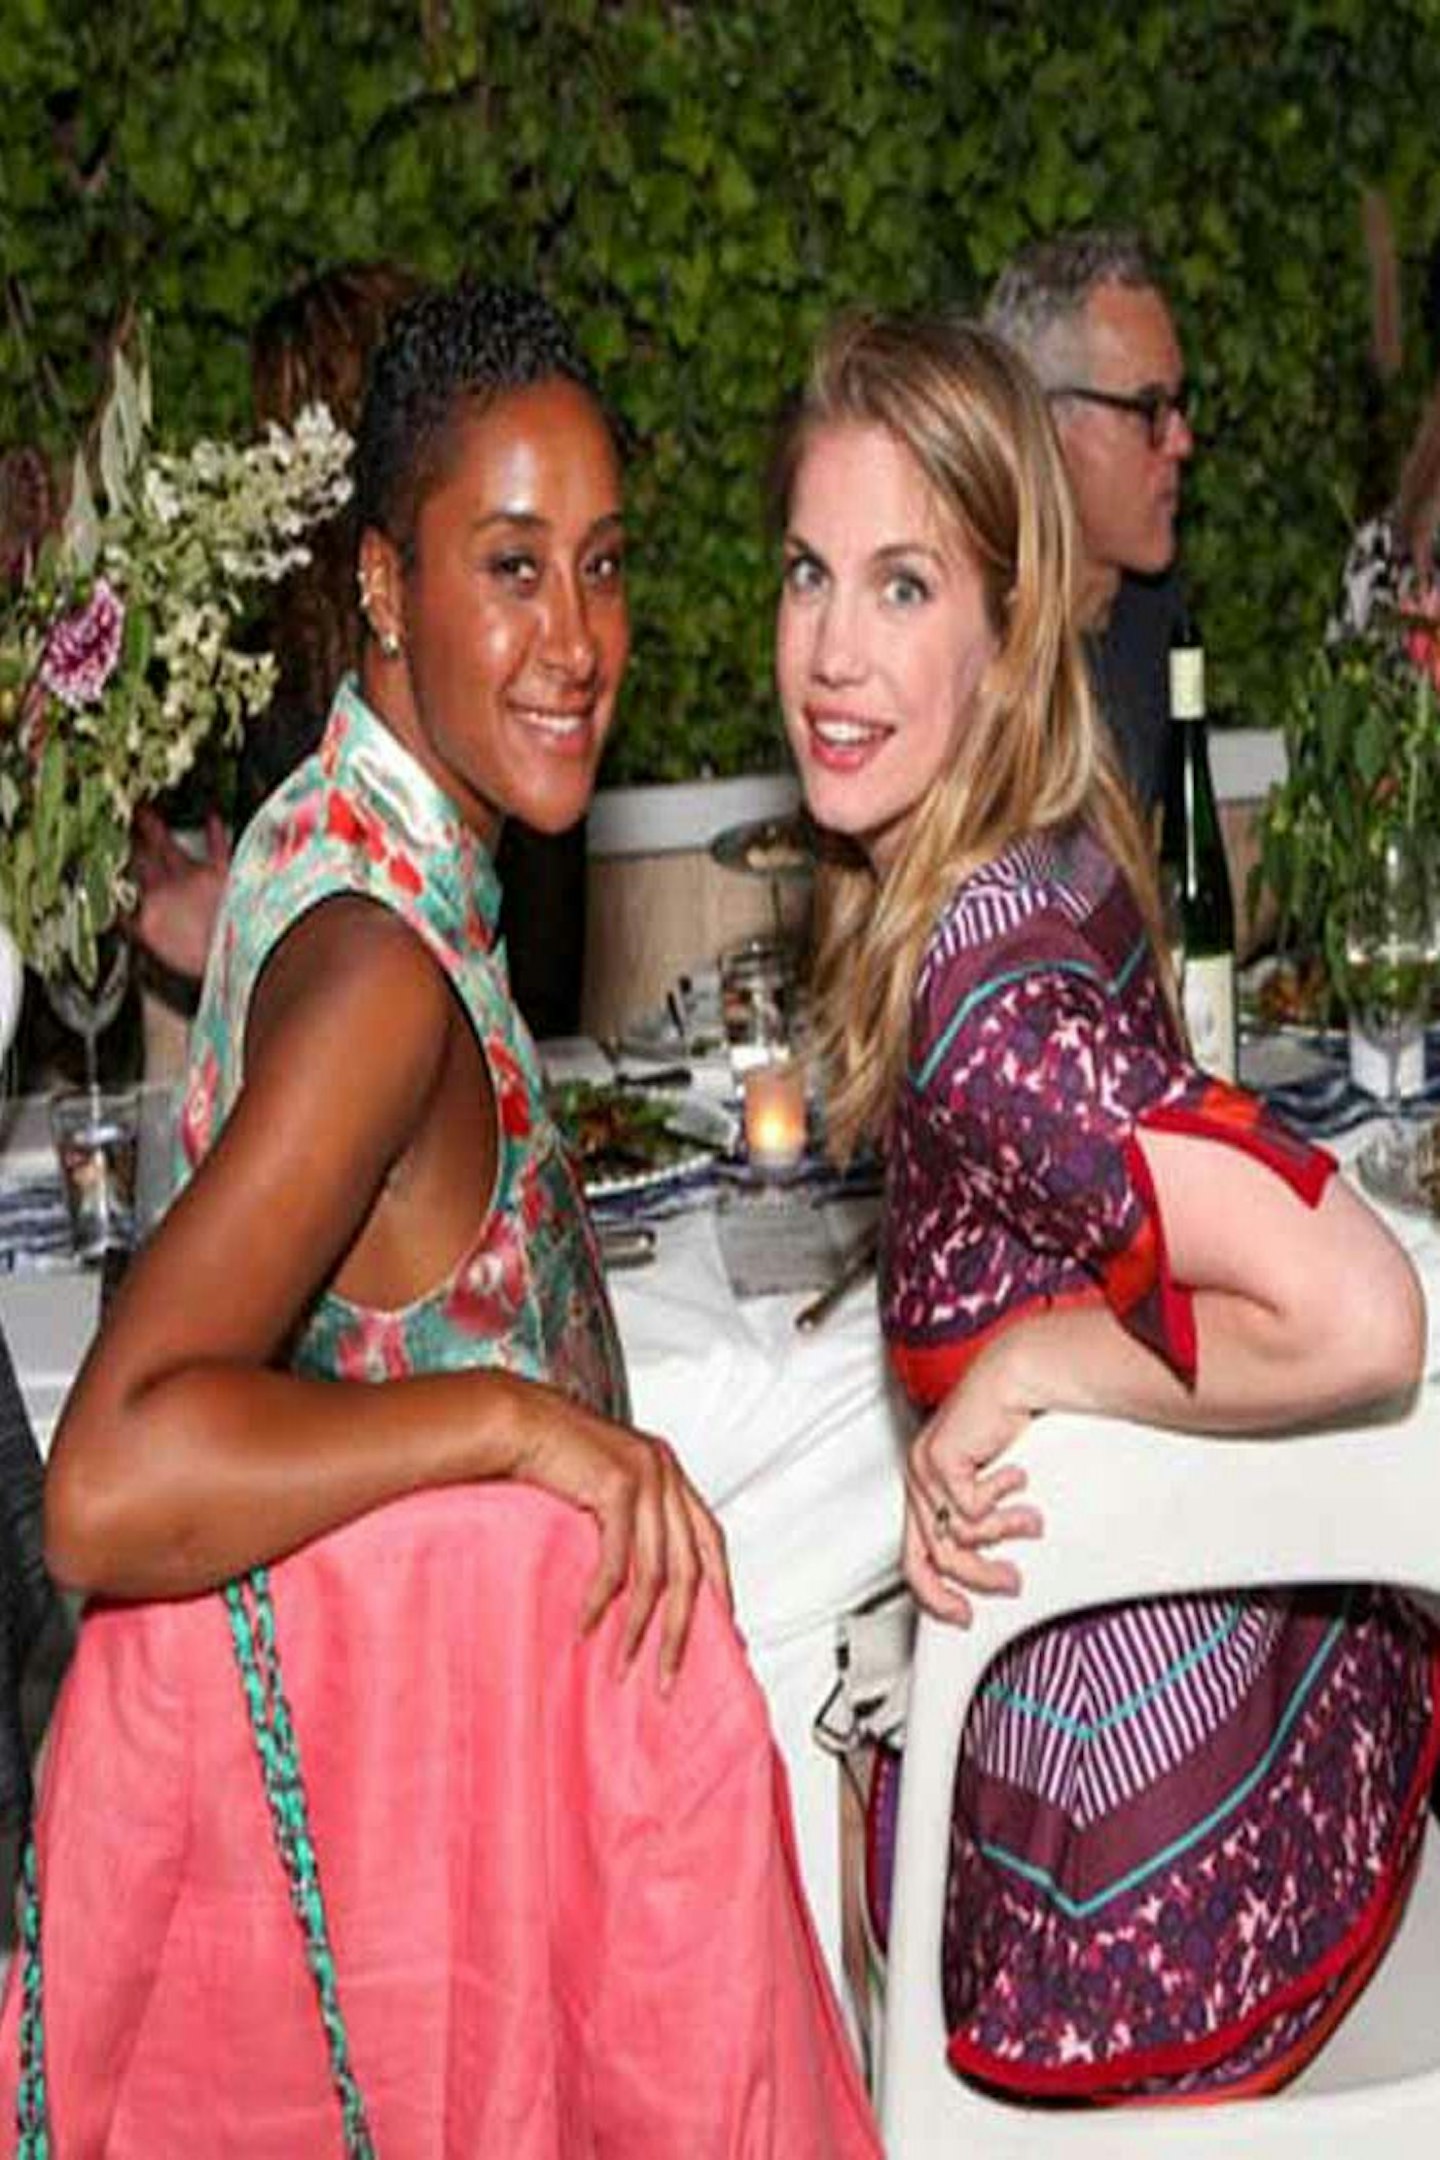 Kimberly Chandler and Anna Chlumsky at the Farfetch x Suno SS15 dinner